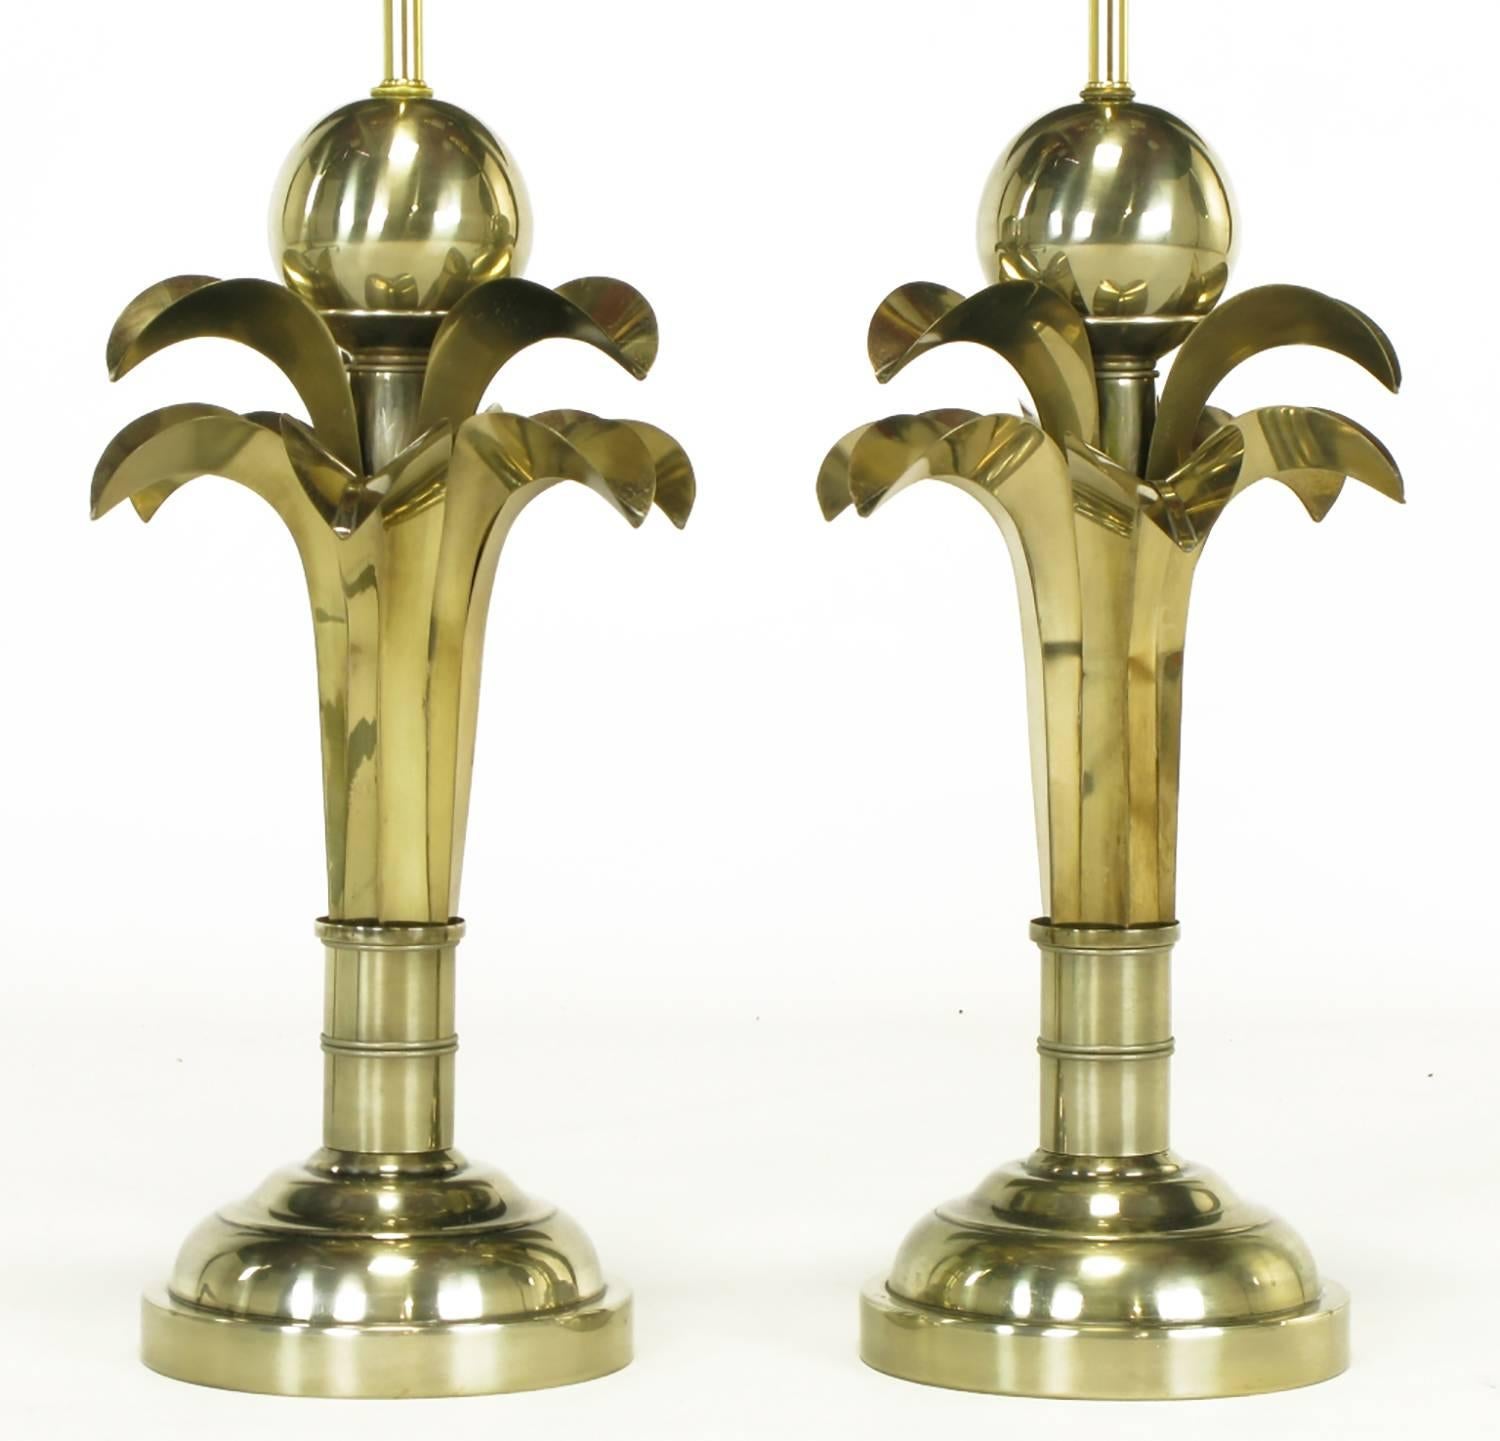 Pair of stylized palm tree table lamps in gold metal by Hart Associates. Half sphere bases, large stylized bamboo stem, two layers of 